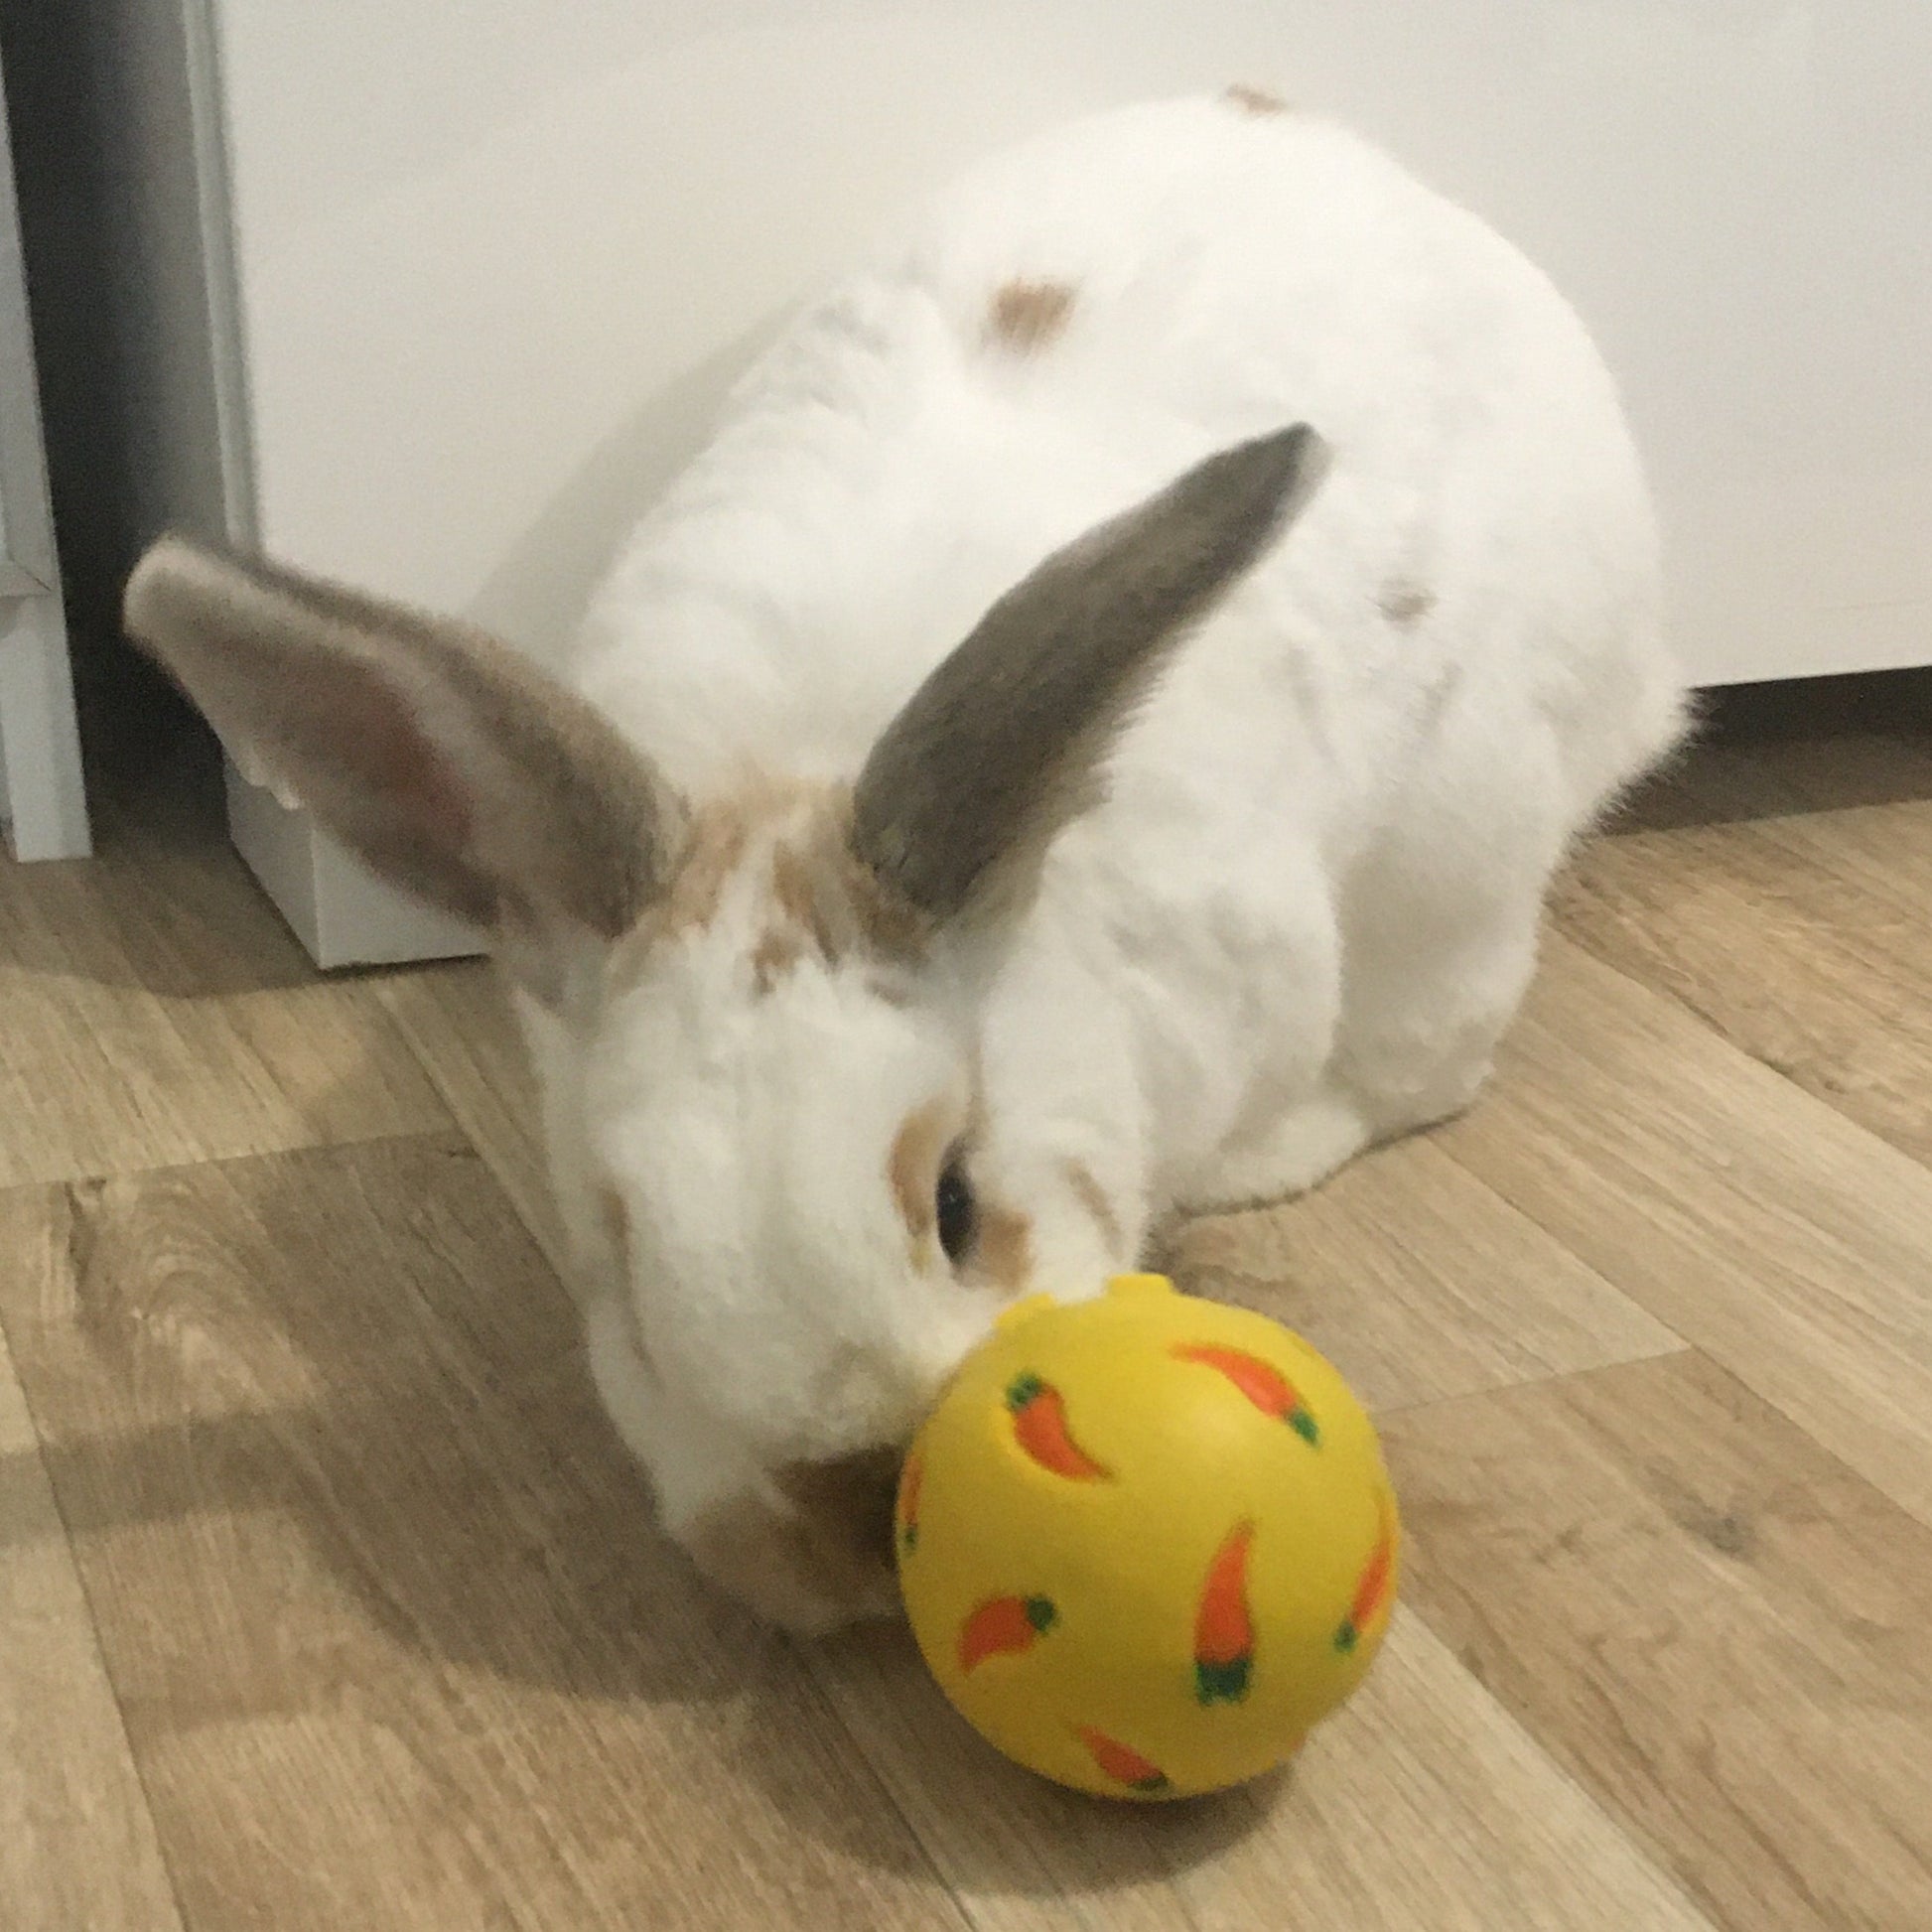 Macaroon, a white rabbit with caramel spots is using her nose to nudge a bright yellow ball with a bold carrot pattern on it.